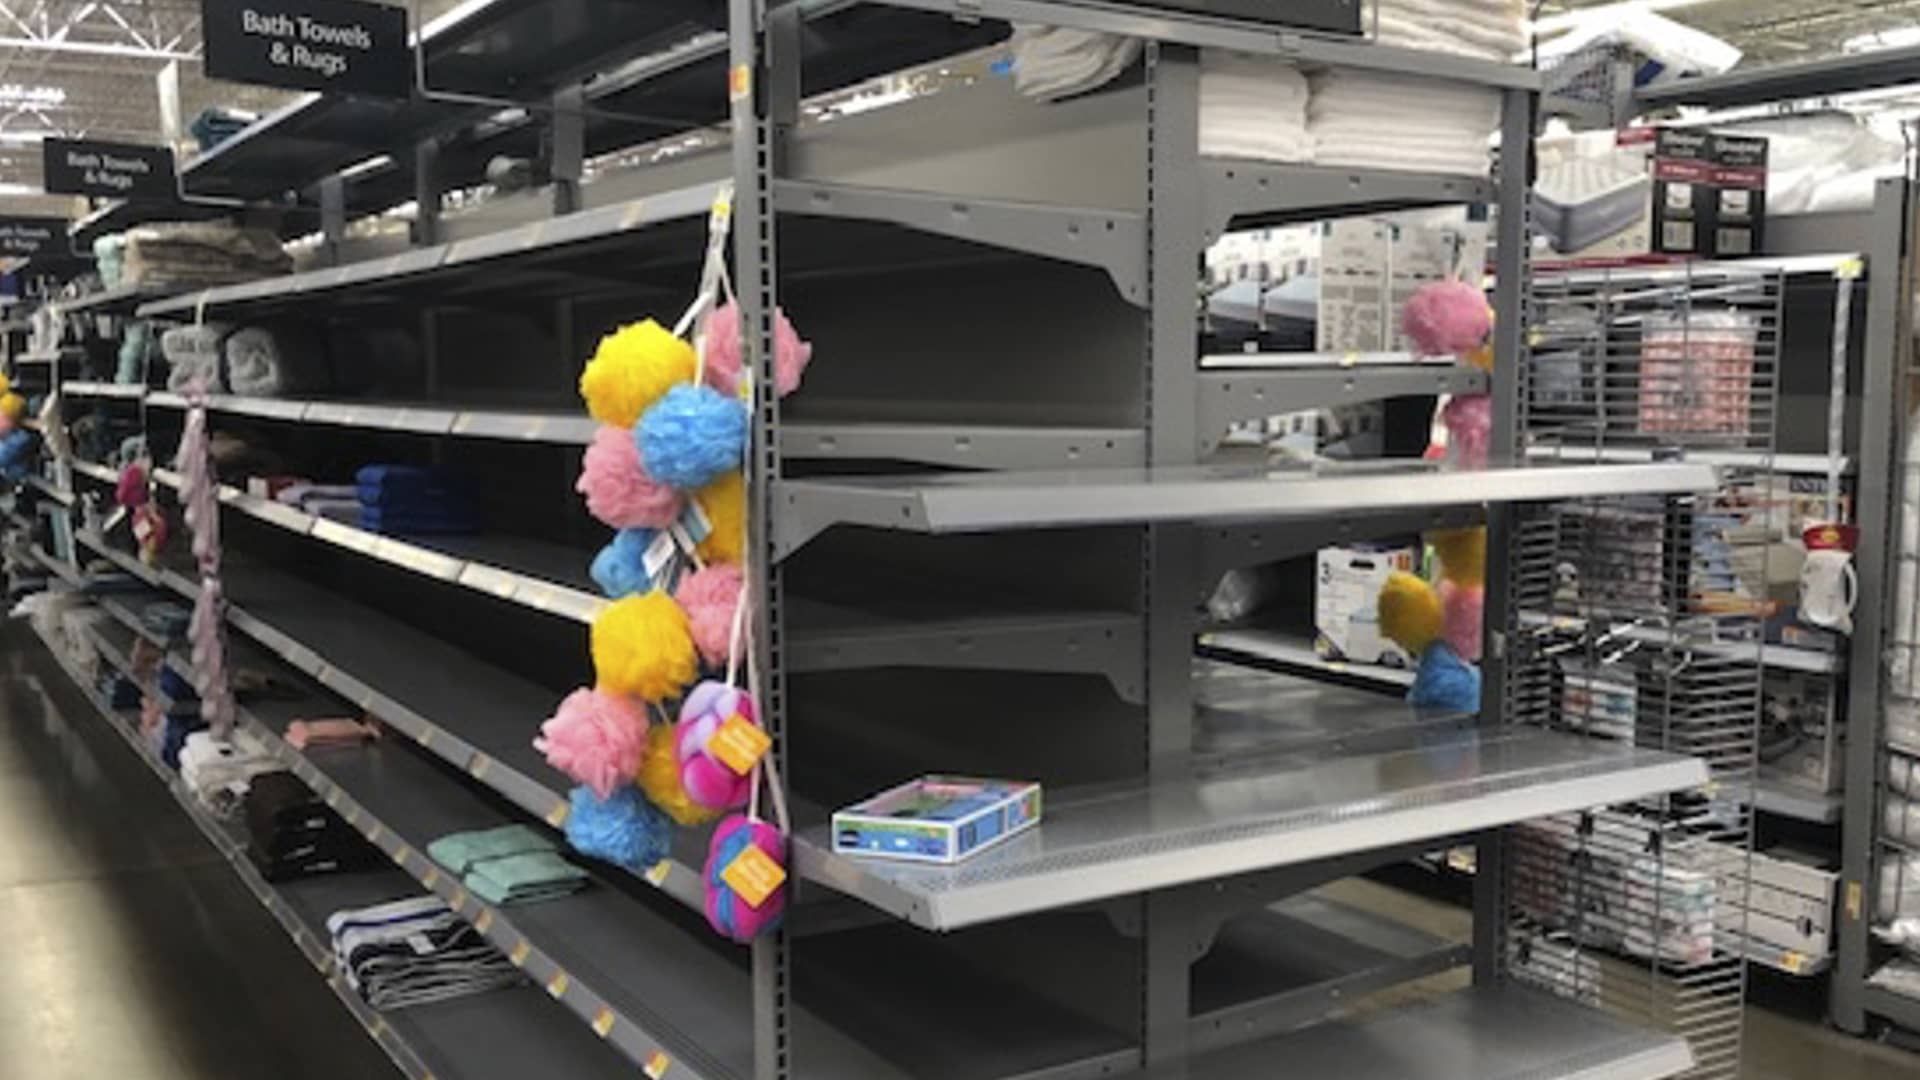 Walmart has had out-of- stocks and empty shelves at some stores in recent months. CEO Doug McMillon attributed it to high demand and supply chain challenges during the pandemic.